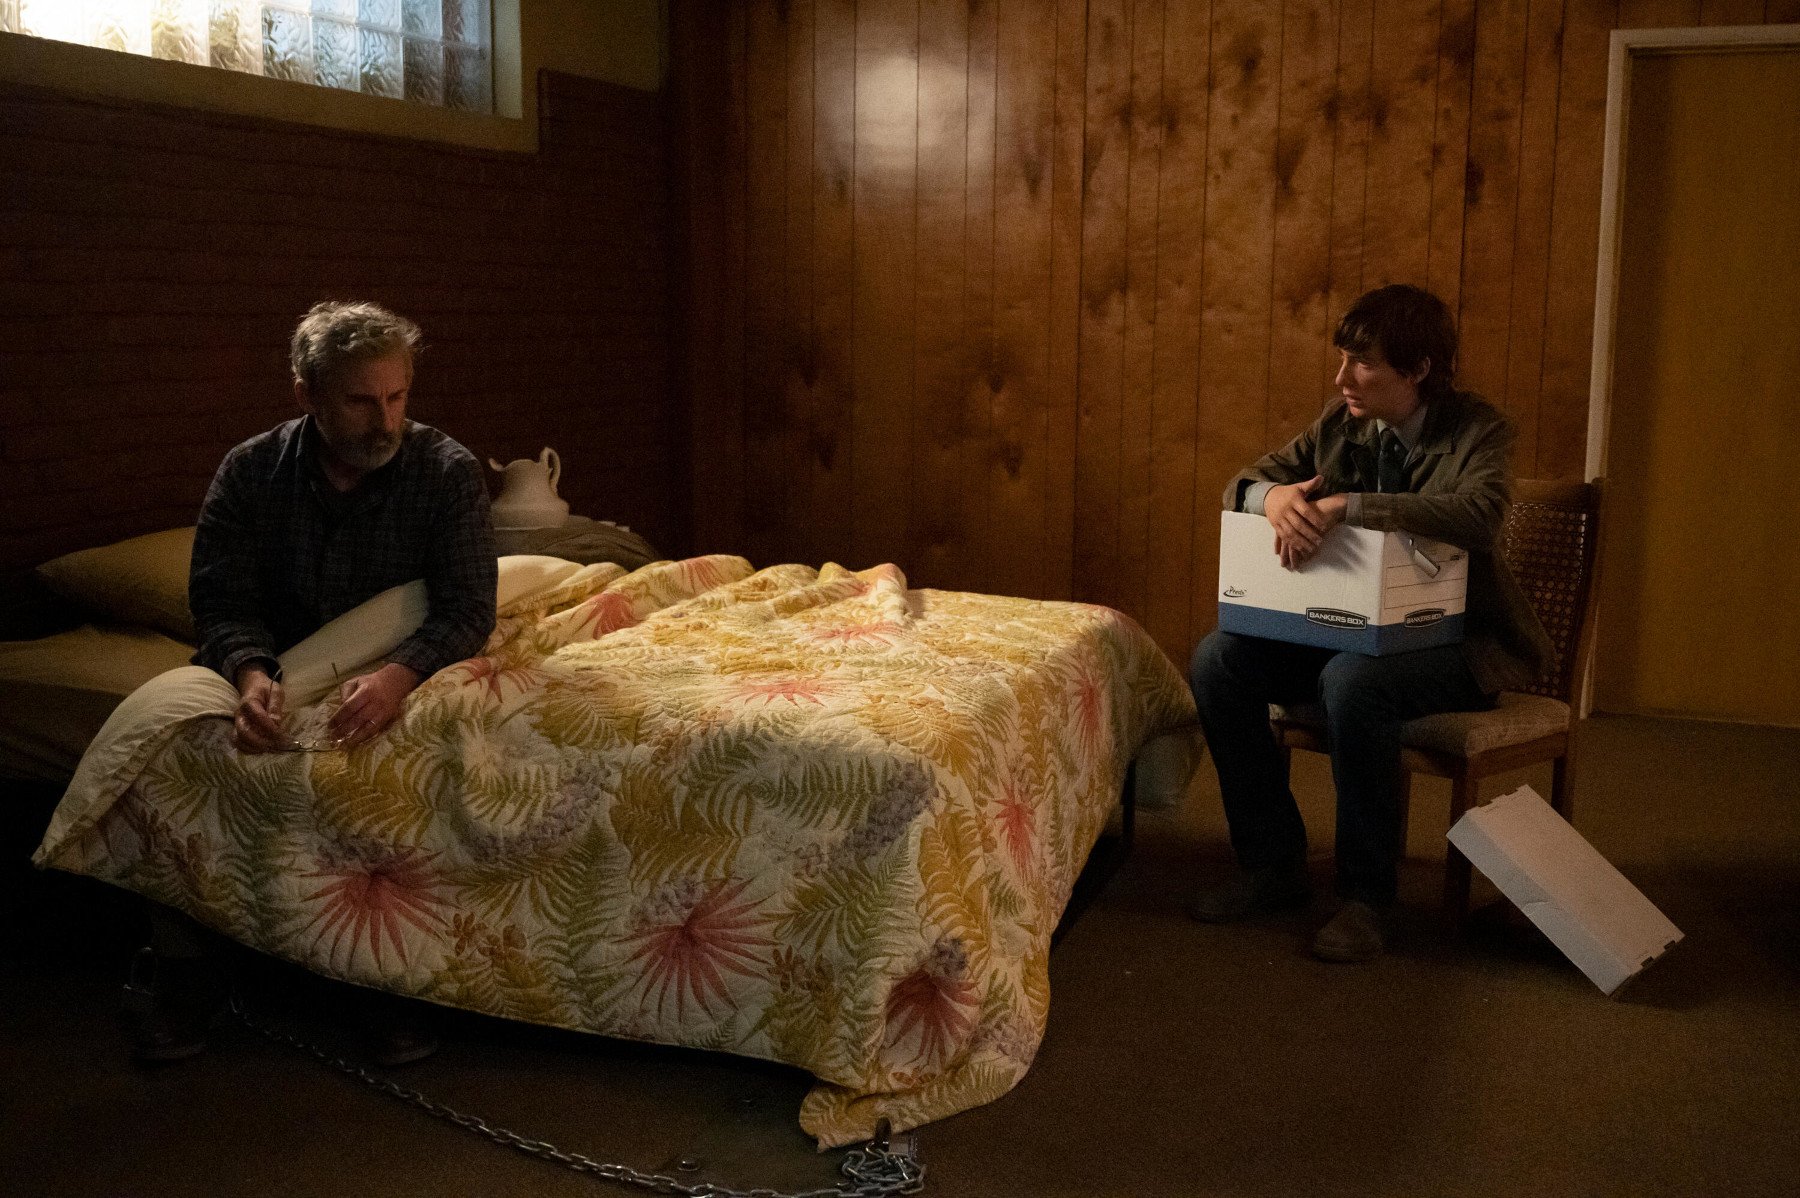 Steve Carell and Domhnall Gleeson as Alan Strauss and Sam Fortner in 'The Patient' for our article about episode 8's release date on Hulu. Alan is sitting in bed, and Sam is in a chair next to him. Sam is holding a box.